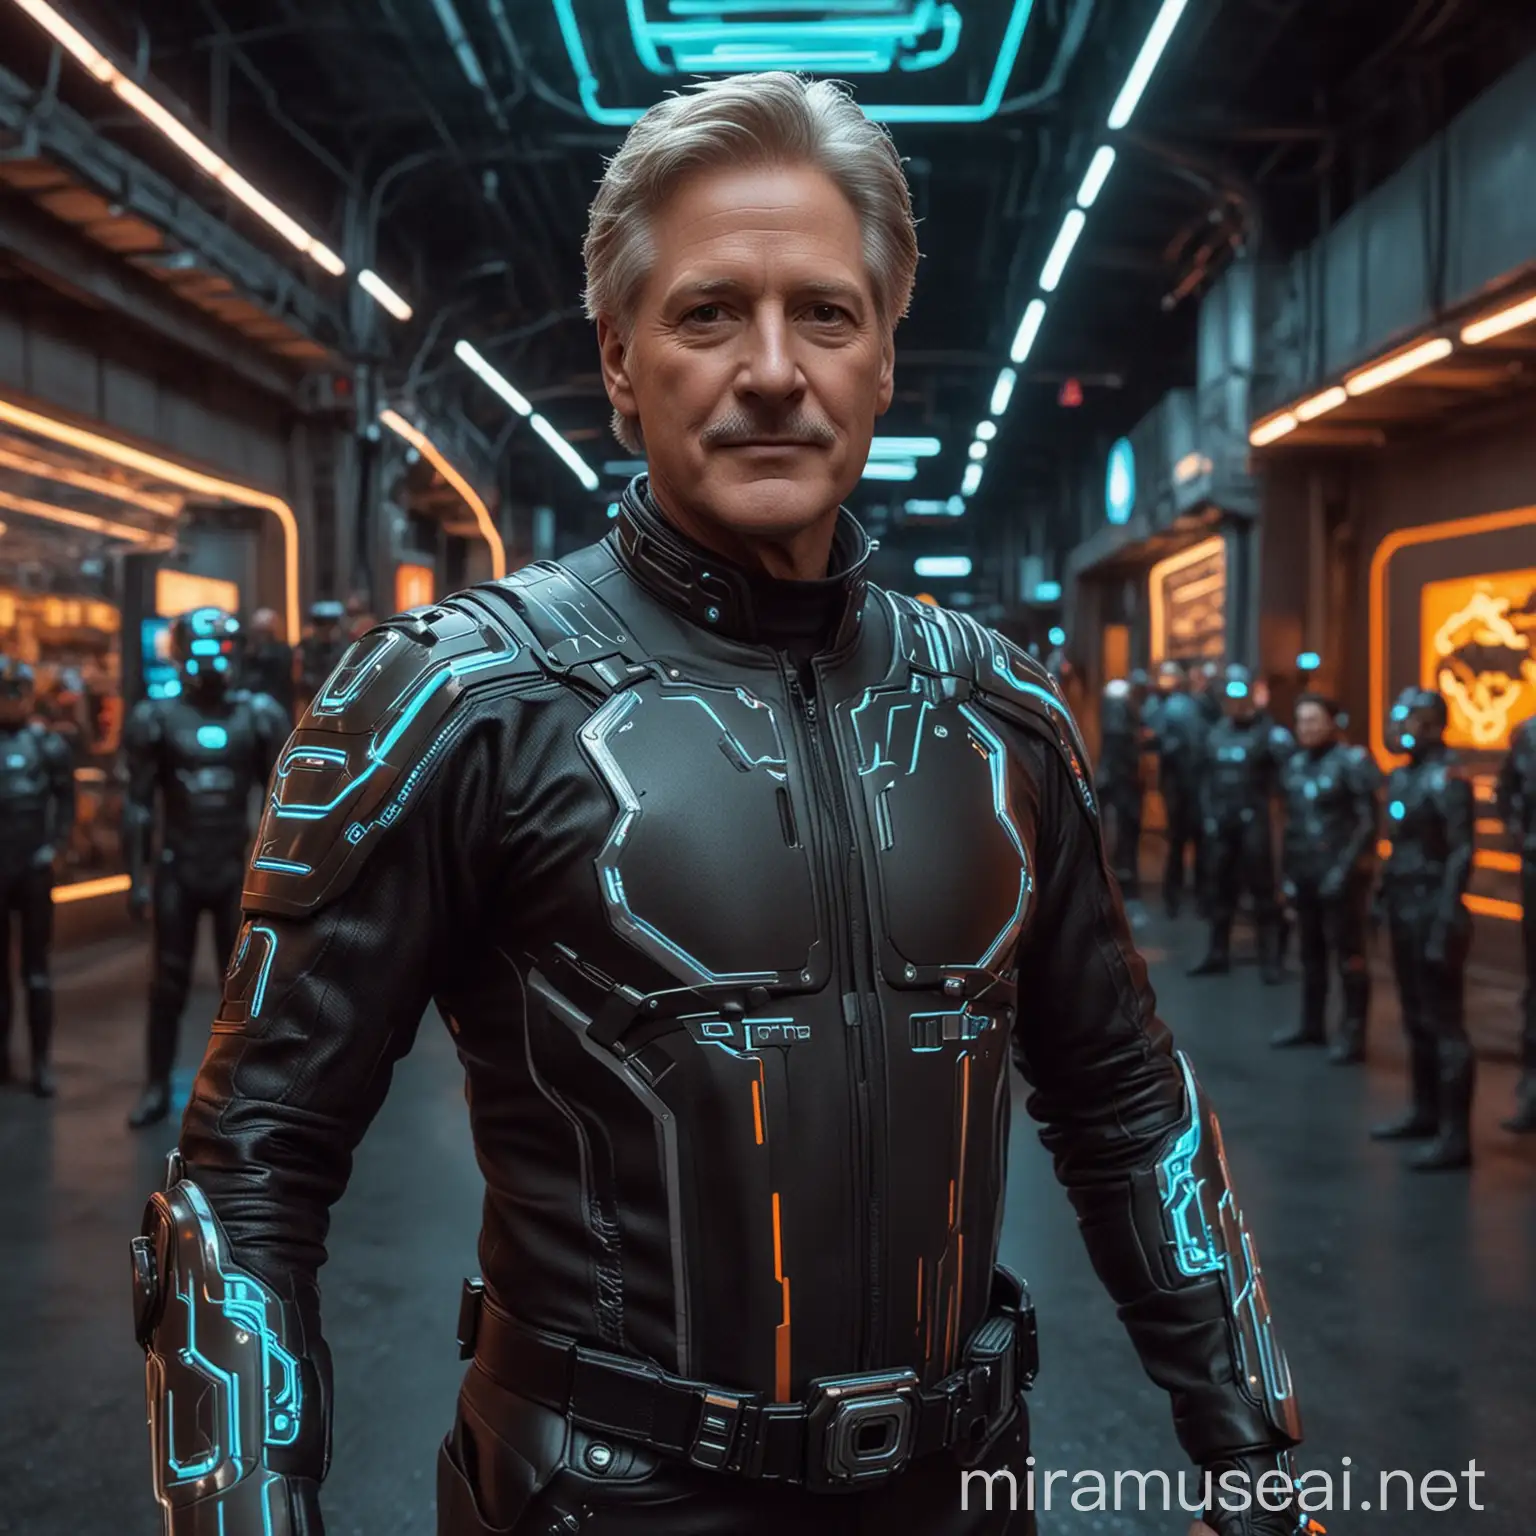 A hyper-realistic GoPro selfie of Bruce Boxleitner dressed as TRON on a movie set, captured in a 16:9 aspect ratio, featuring detailed textures, vivid colors, and realistic lighting, with the movie set's background visible.